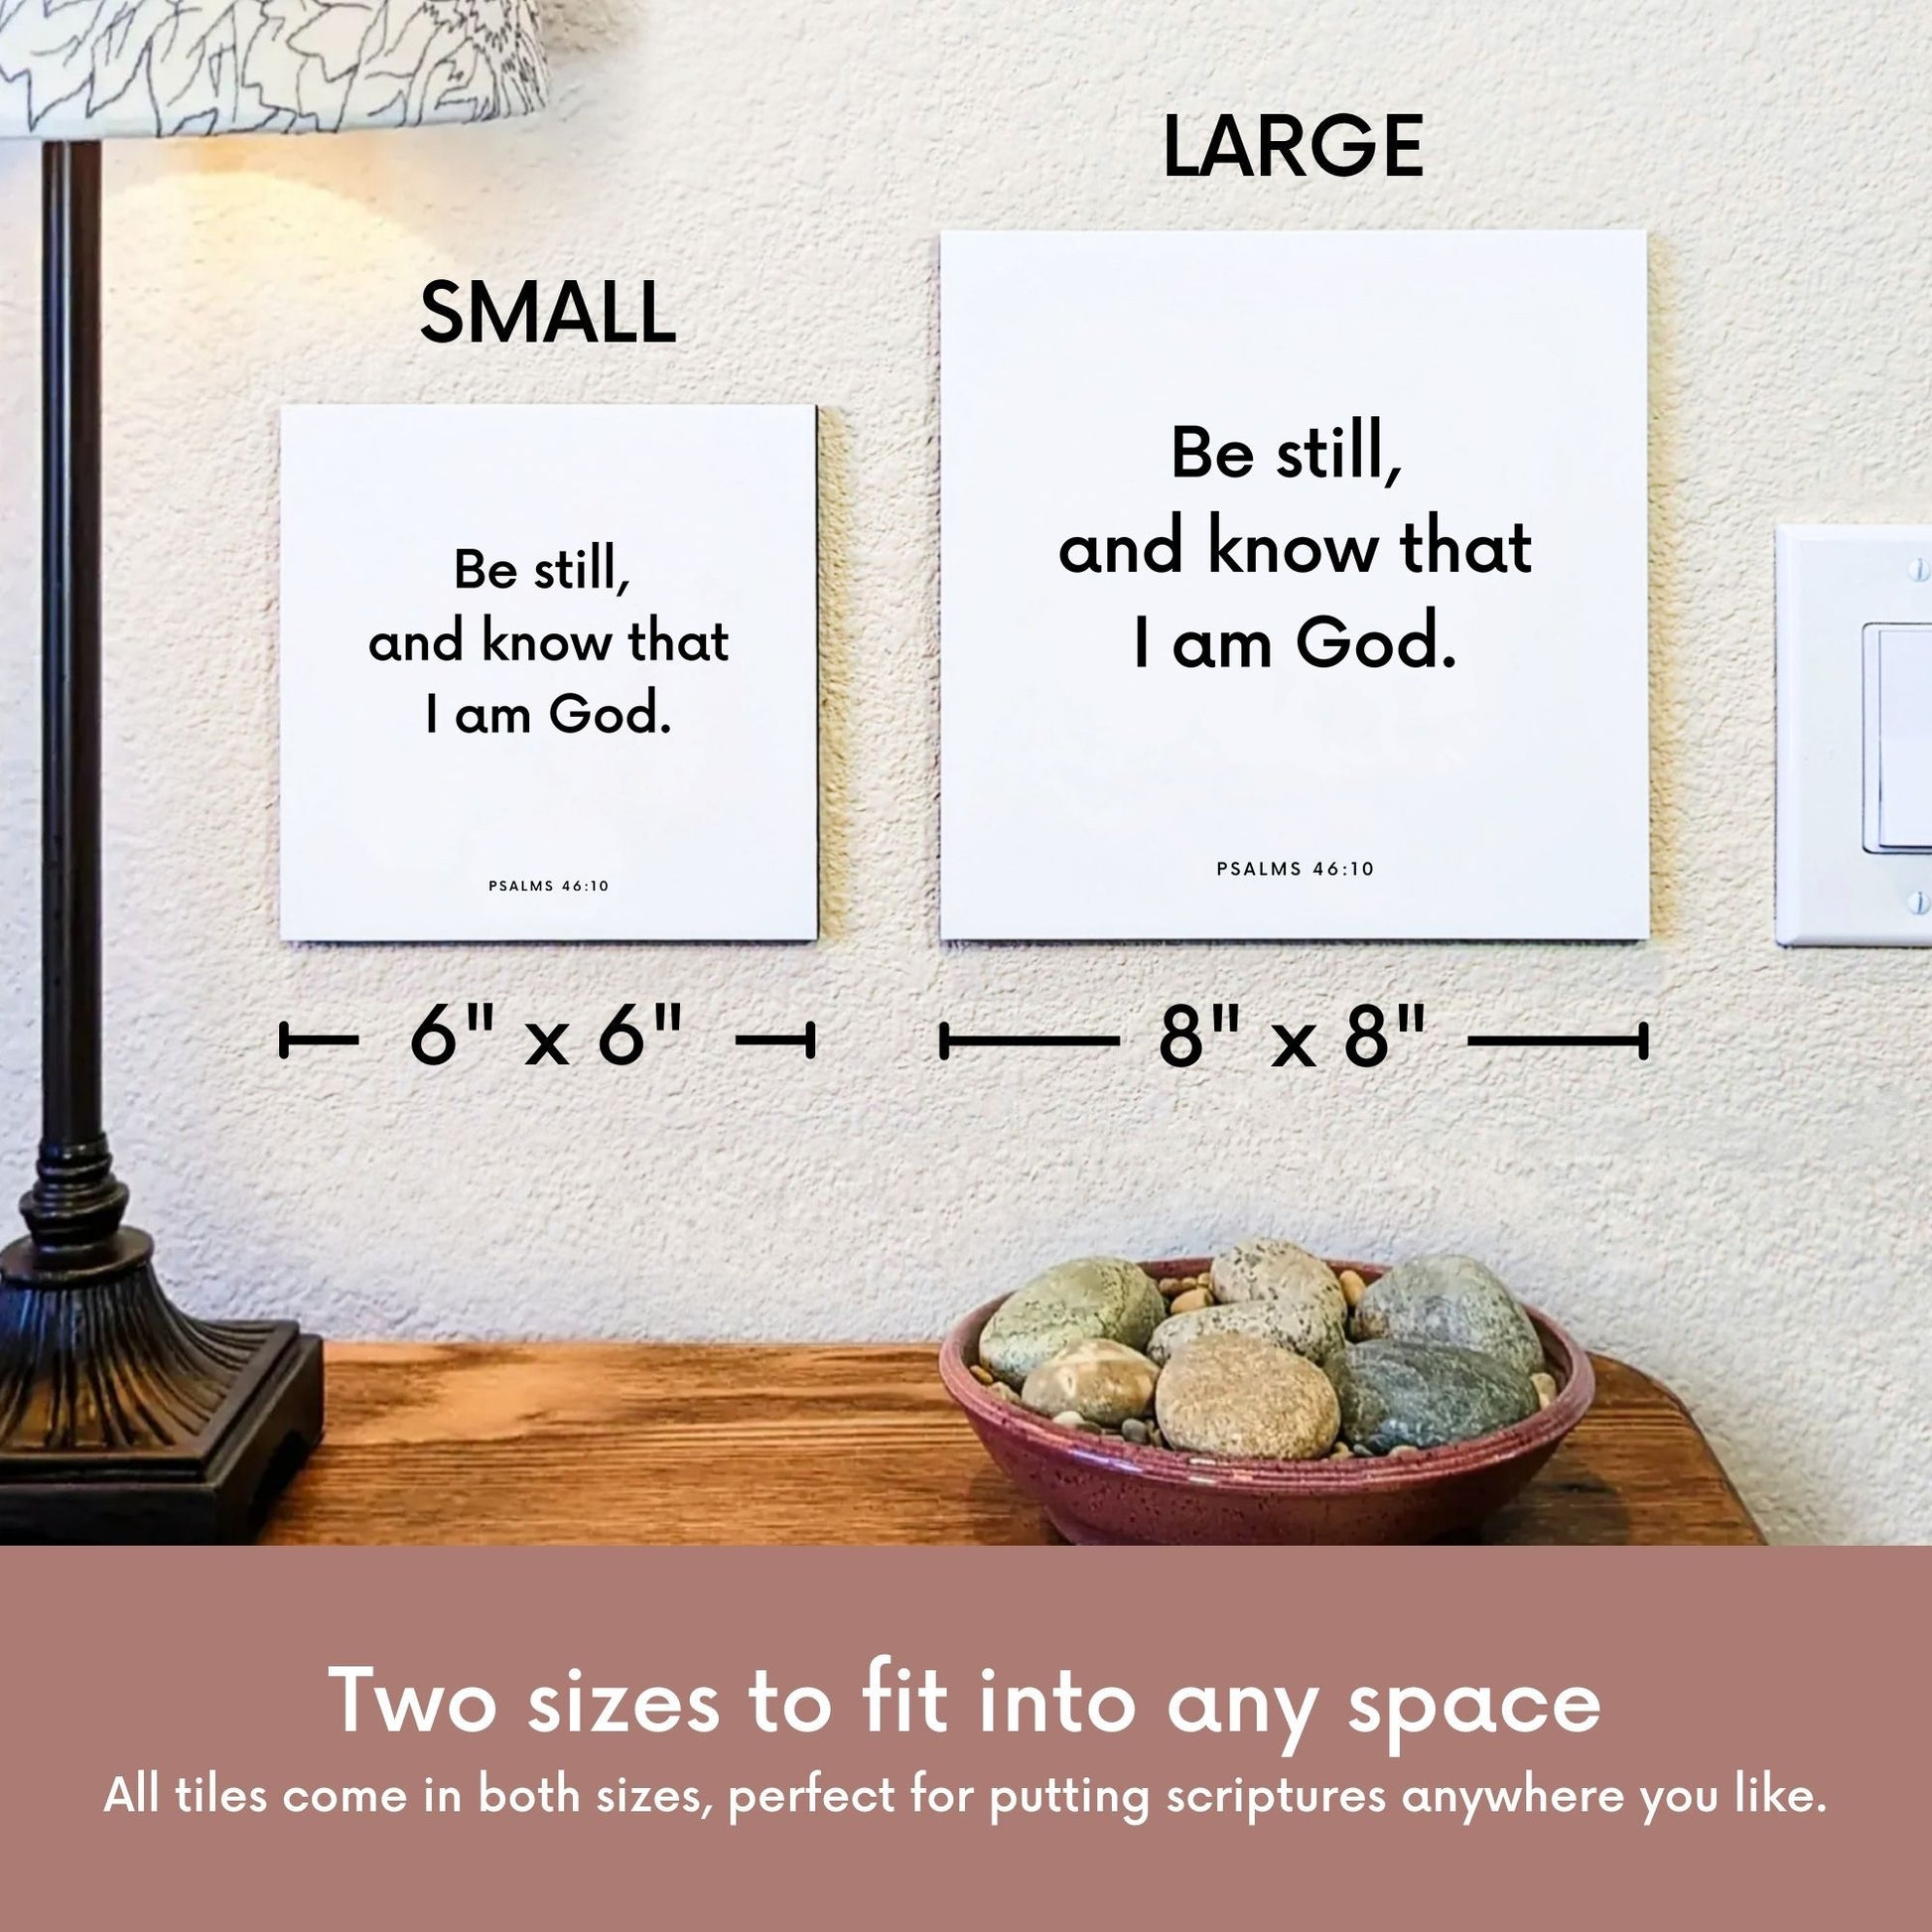 Scripture tile size comparison for Psalms 46:10 - "Be still, and know that I am God"